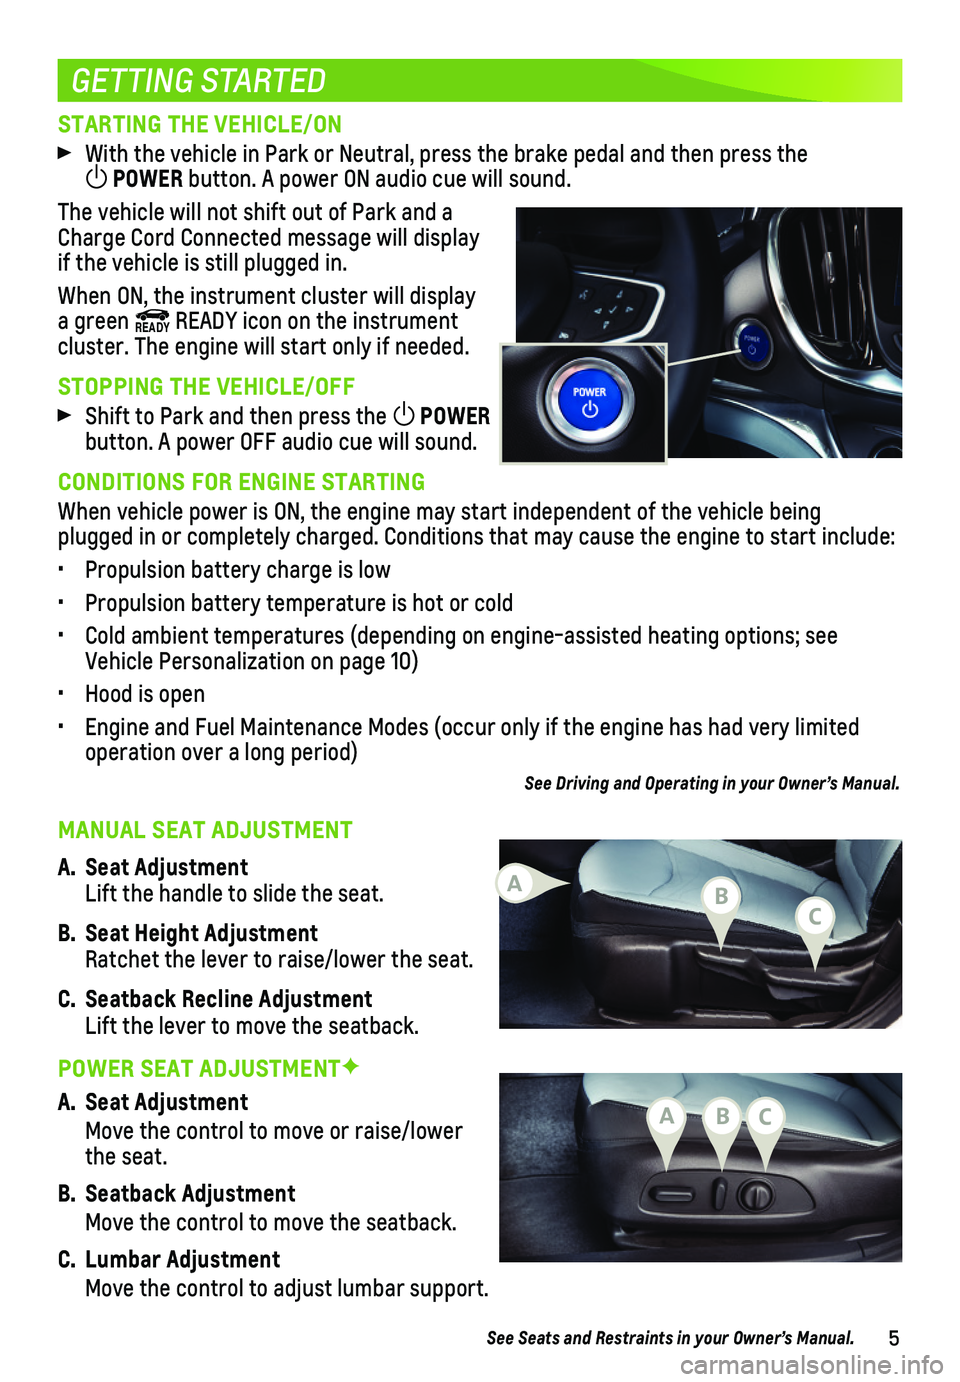 CHEVROLET VOLT 2019  Get To Know Guide 5
STARTING THE VEHICLE/ON
 With the vehicle in Park or Neutral, press the brake pedal and then press the  POWER button. A power ON audio cue will sound.
The vehicle will not shift out of Park and a C